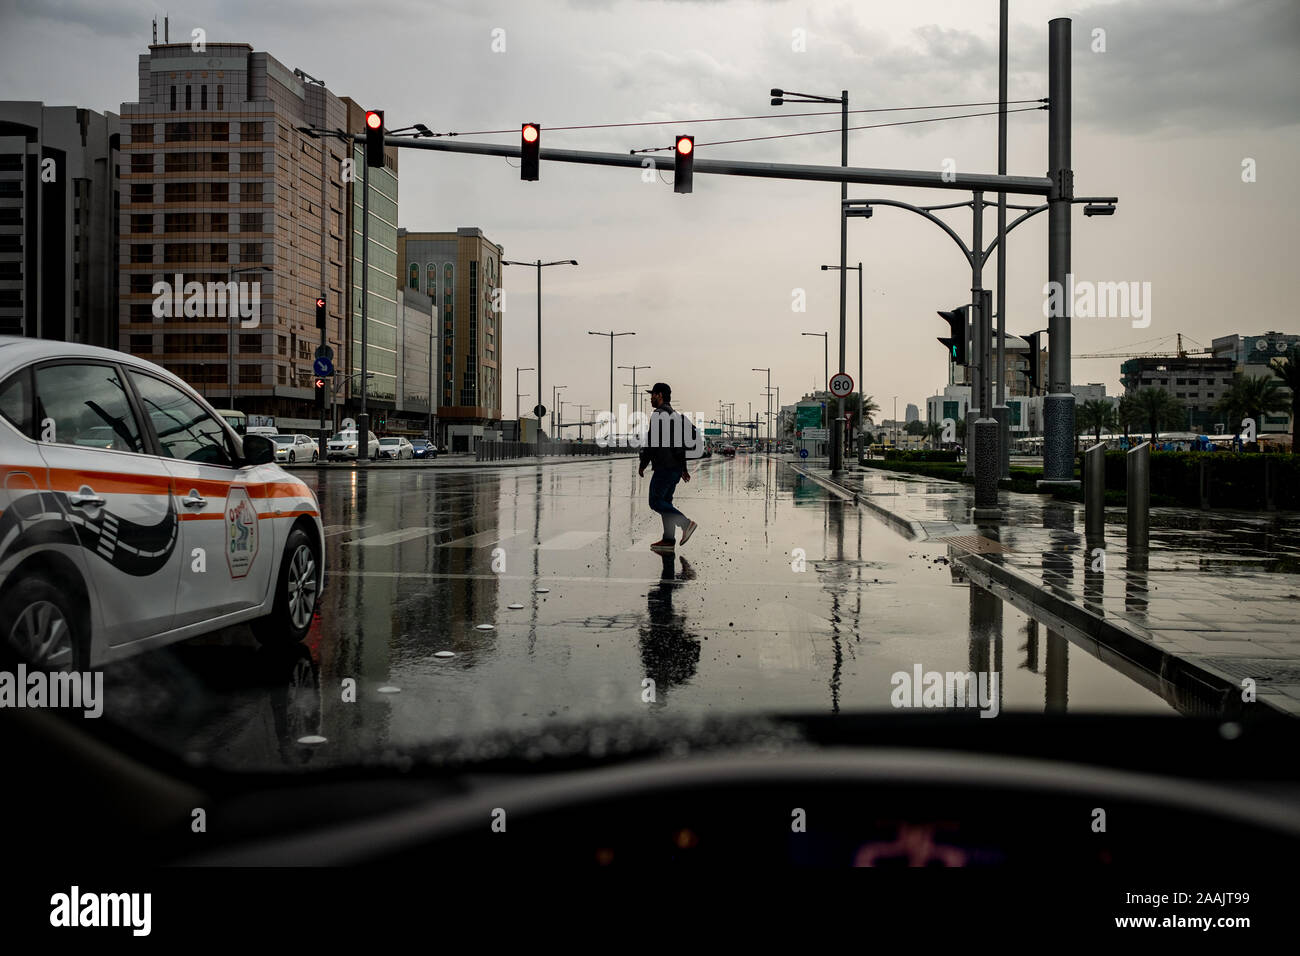 A person crossing the road while raining in Abu Dhabi, UAE Stock Photo